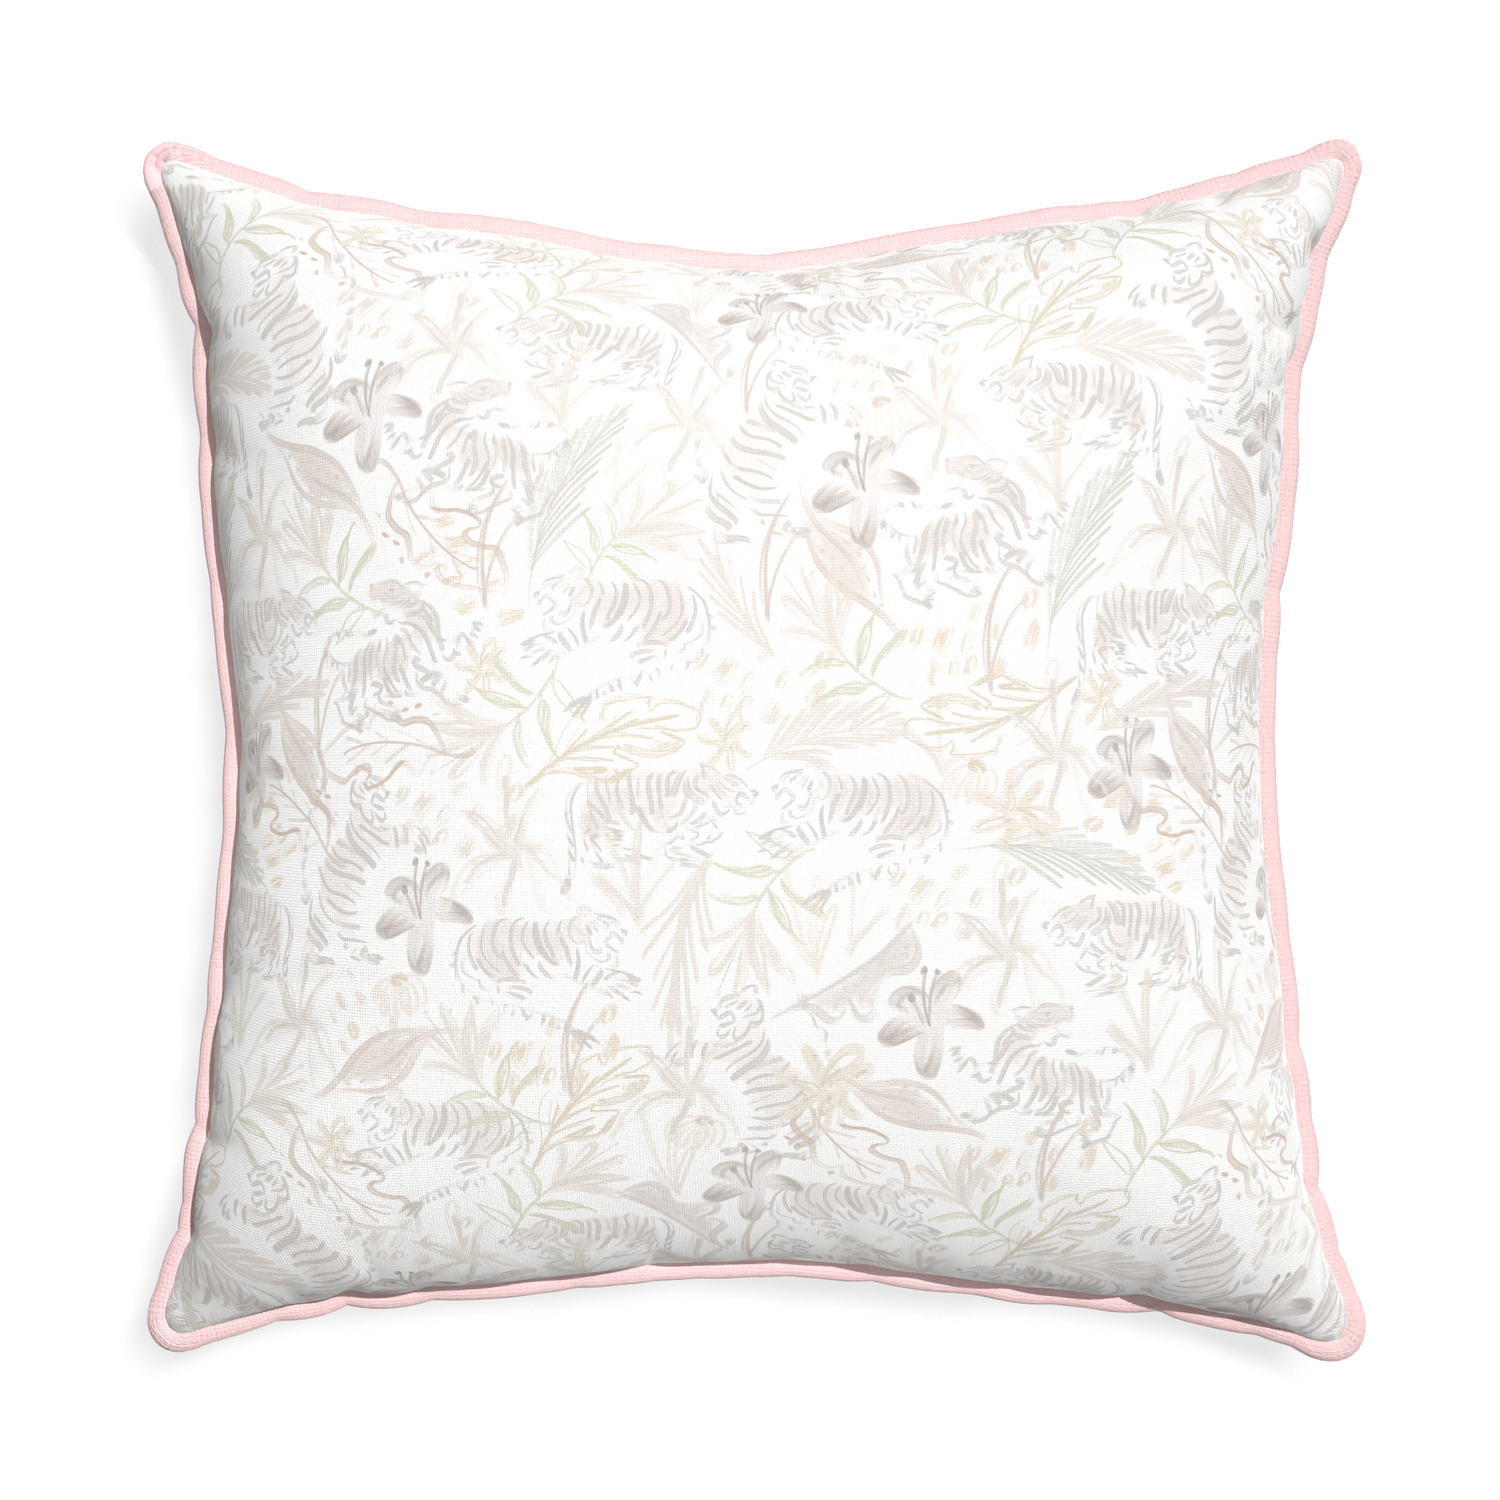 Euro-sham frida sand custom beige chinoiserie tigerpillow with petal piping on white background